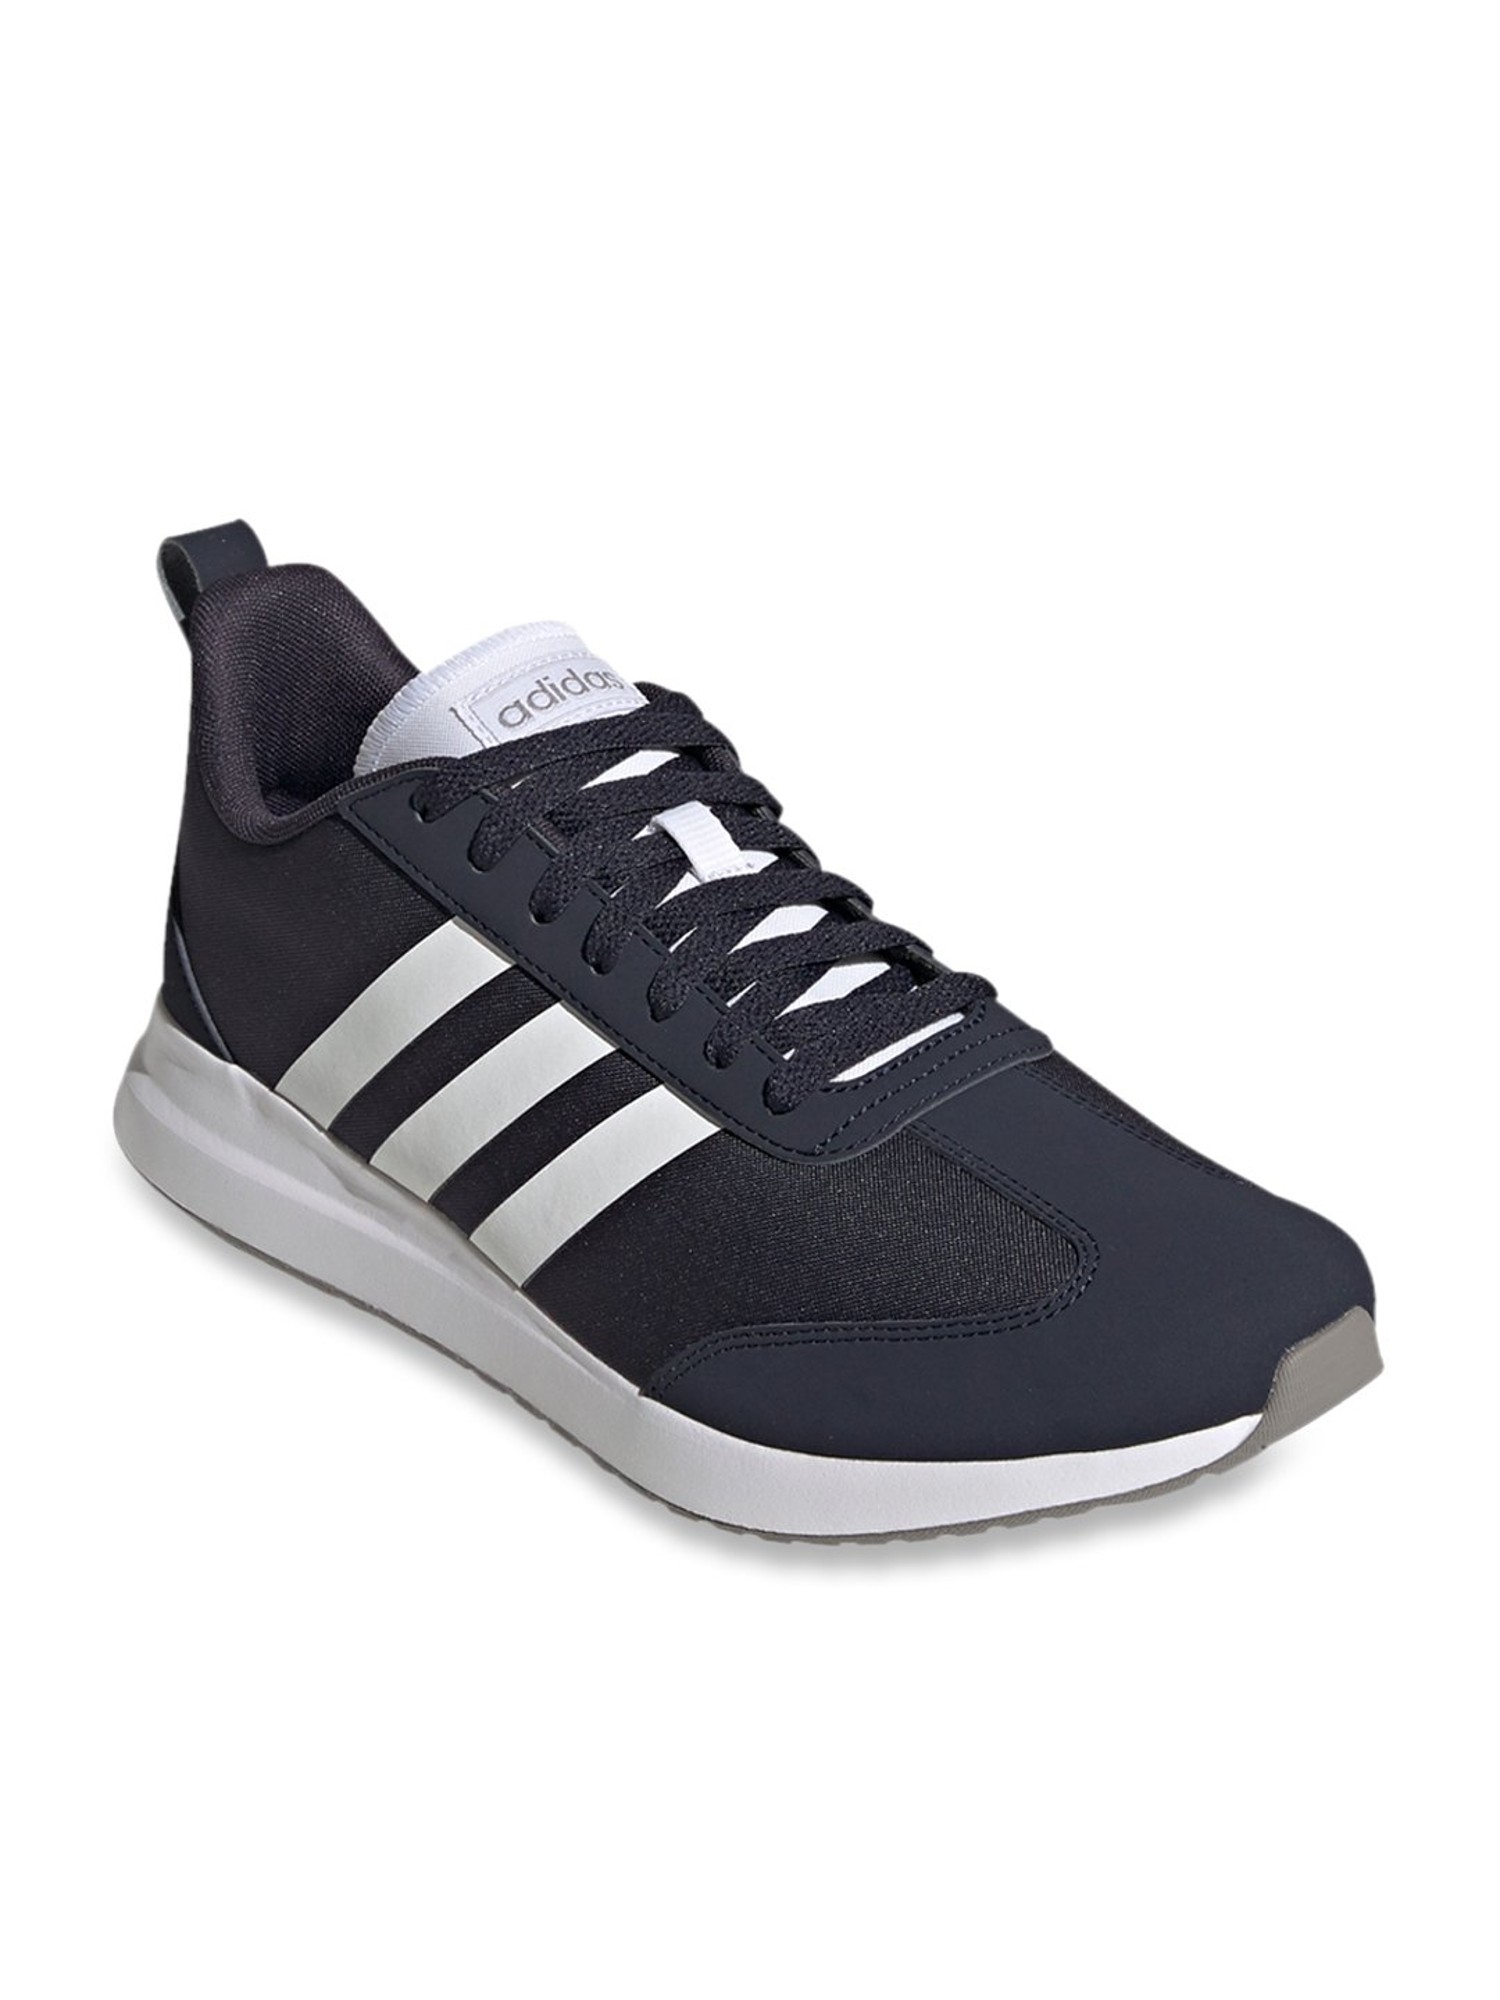 adidas classic running shoes